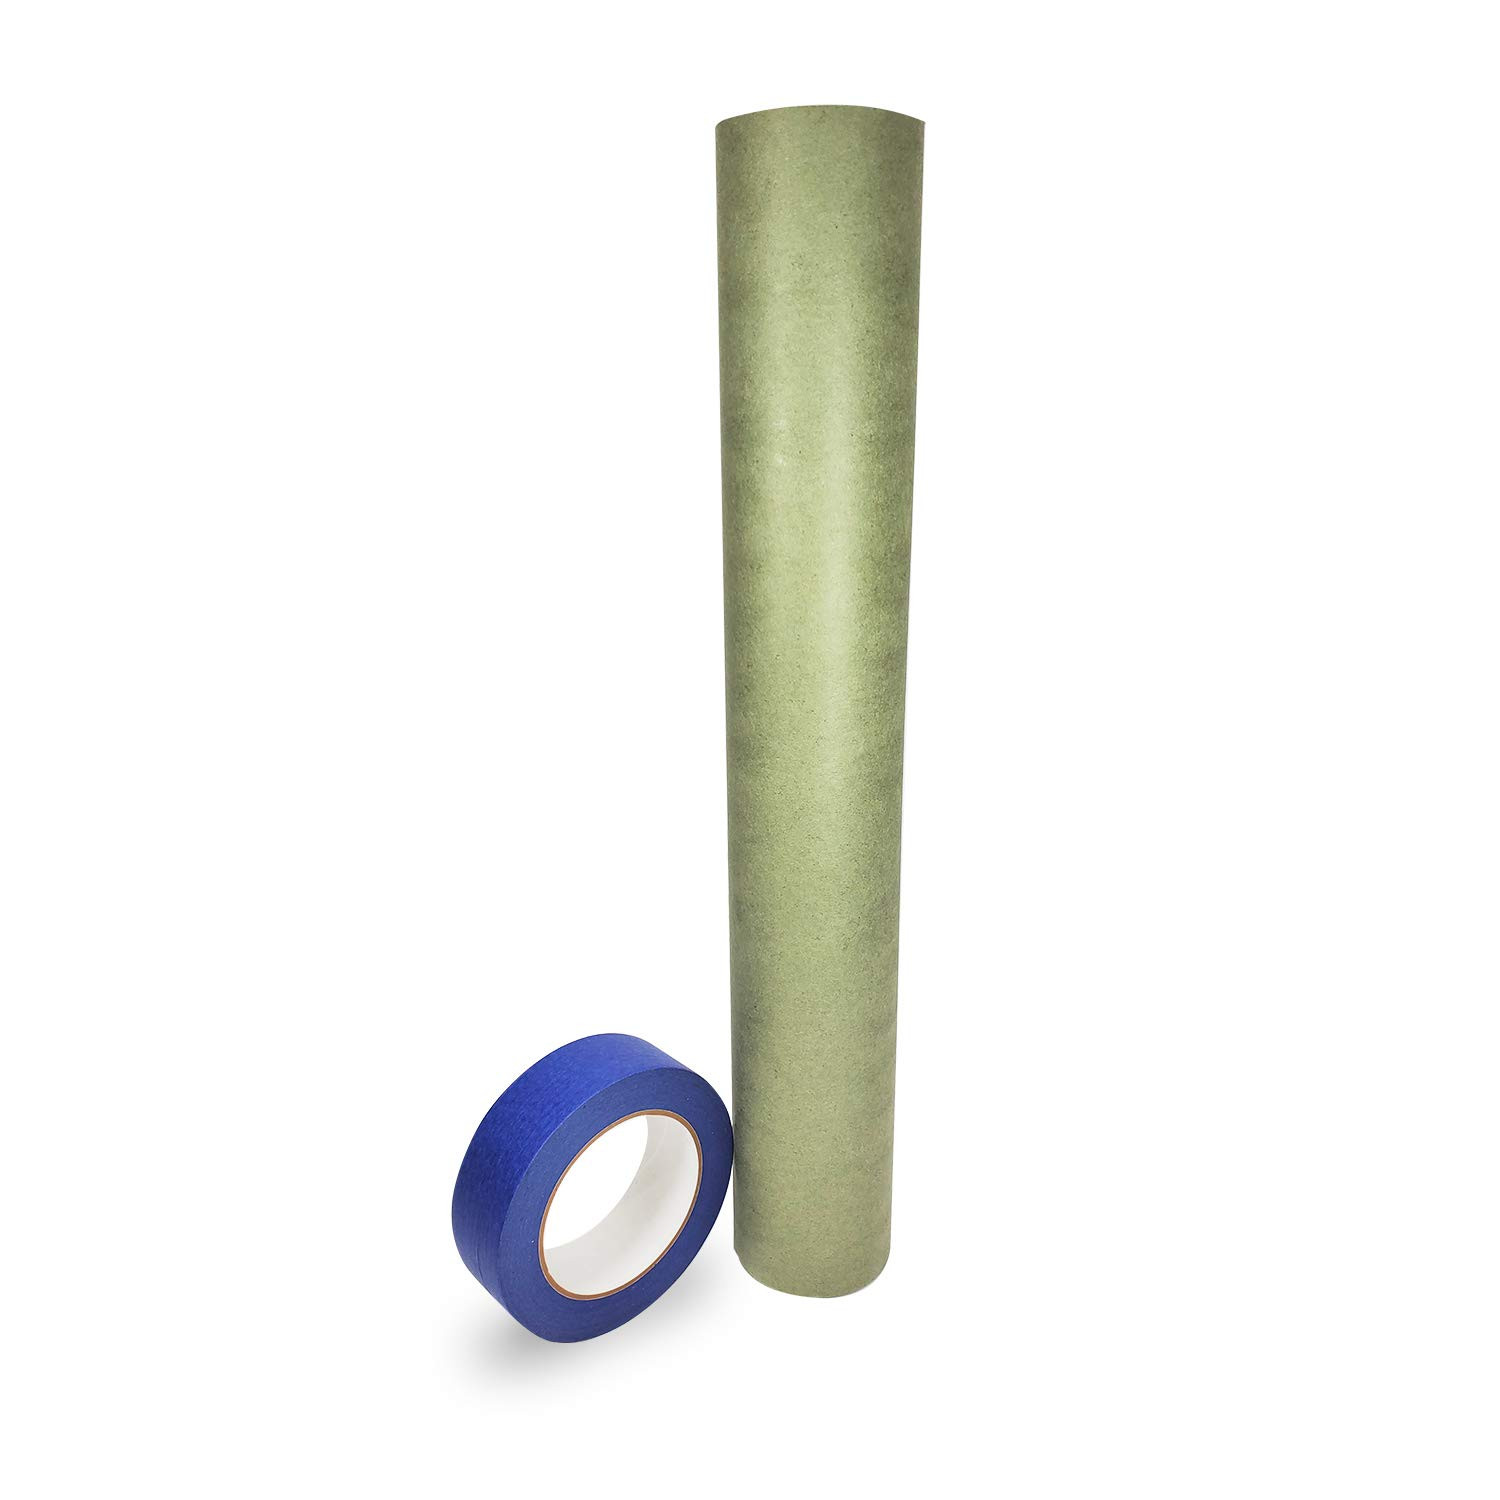 1 x 60 yards Blue Painters Tape for Painting, Natural Rubber buy in stock  in U.S. in IDL Packaging